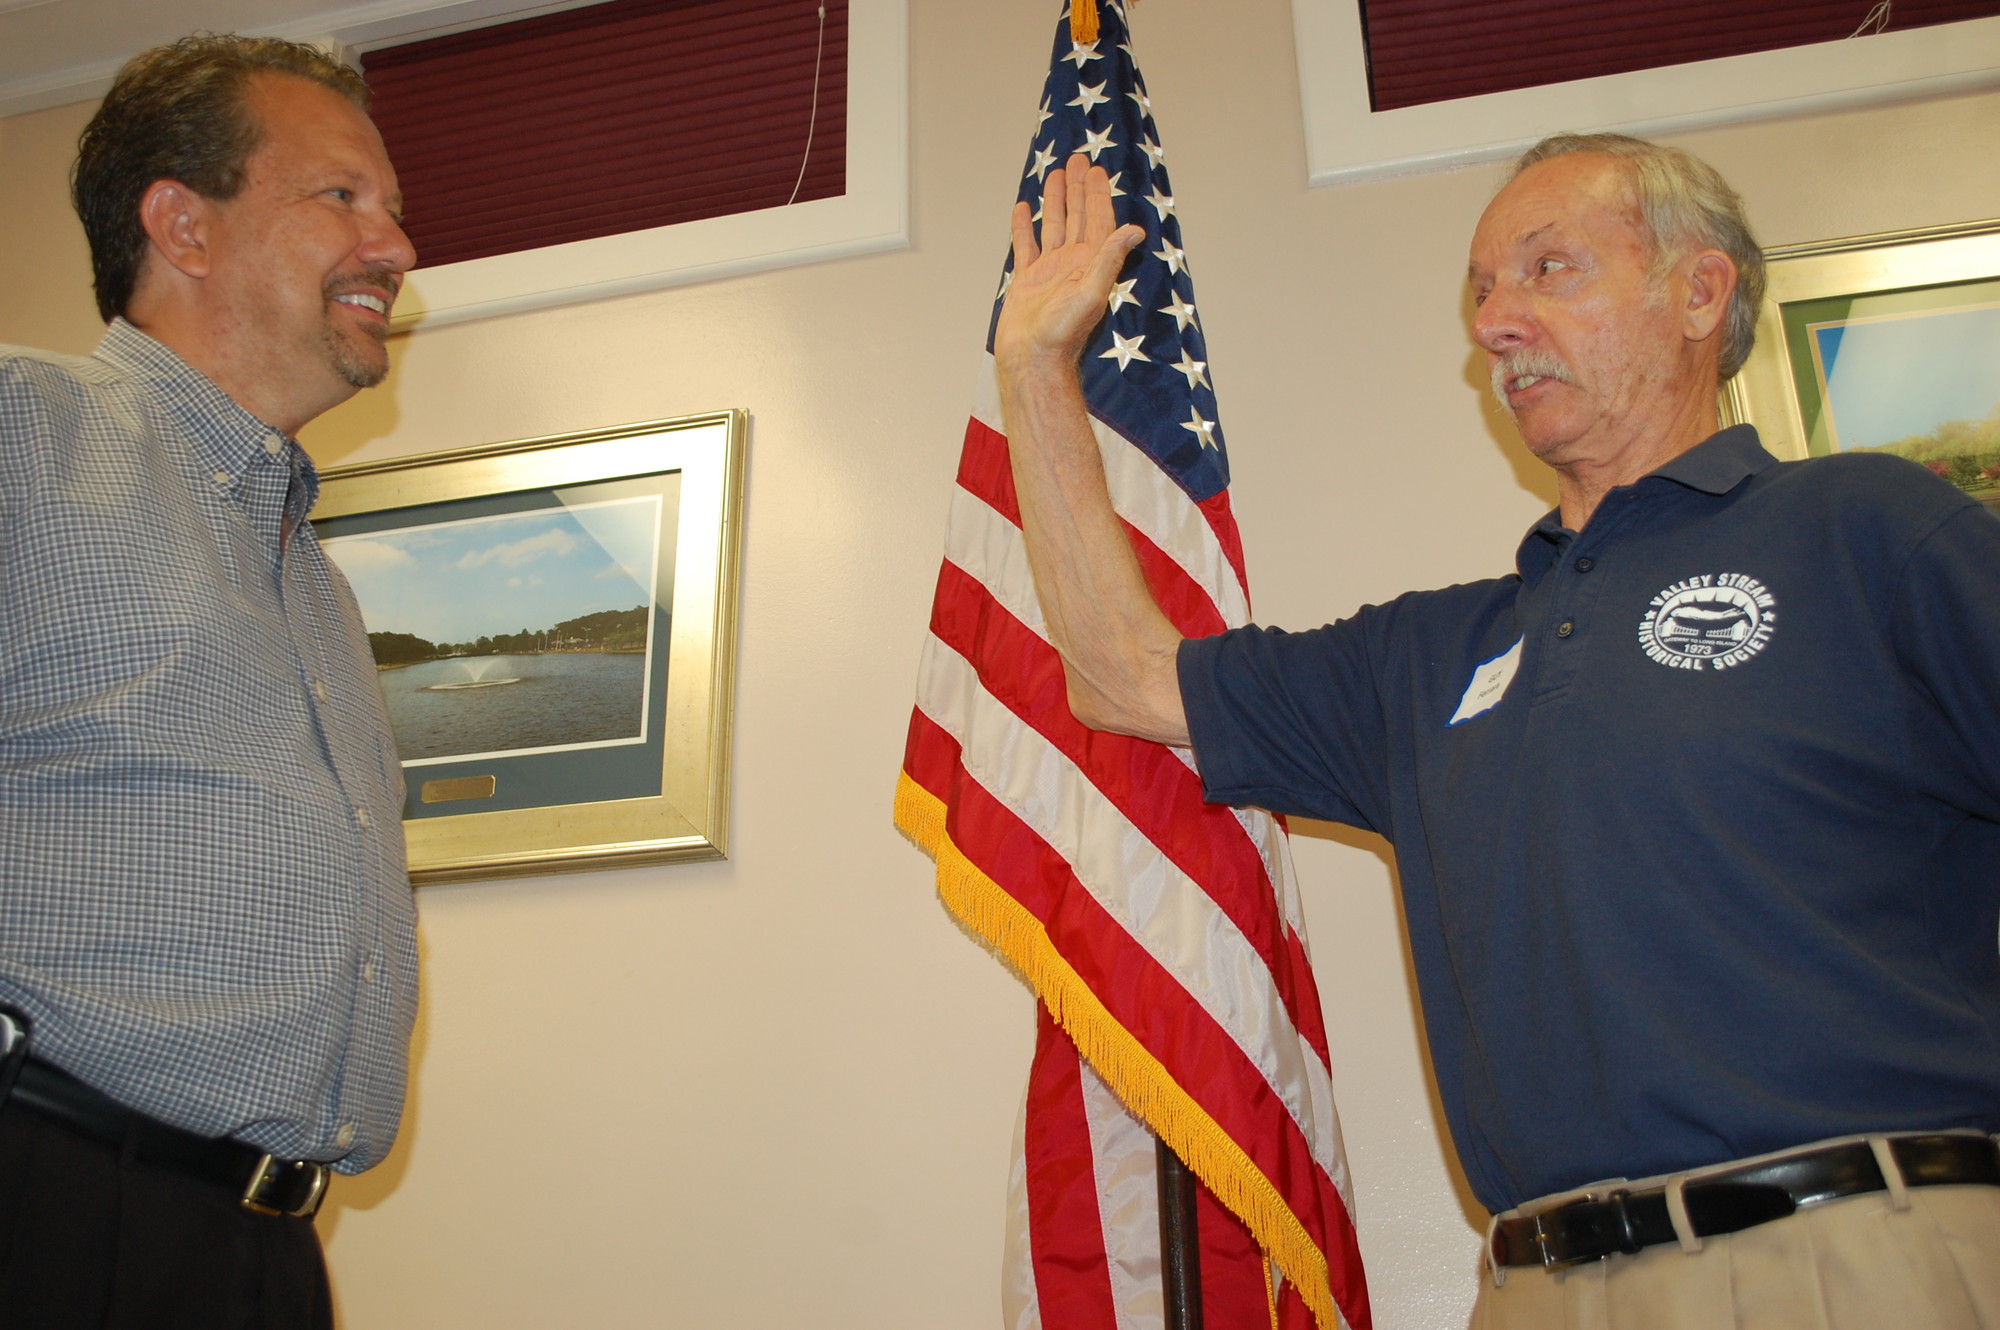 Guy Ferrara, right, was installed for another term as president by Valley Stream Mayor Ed Fare.